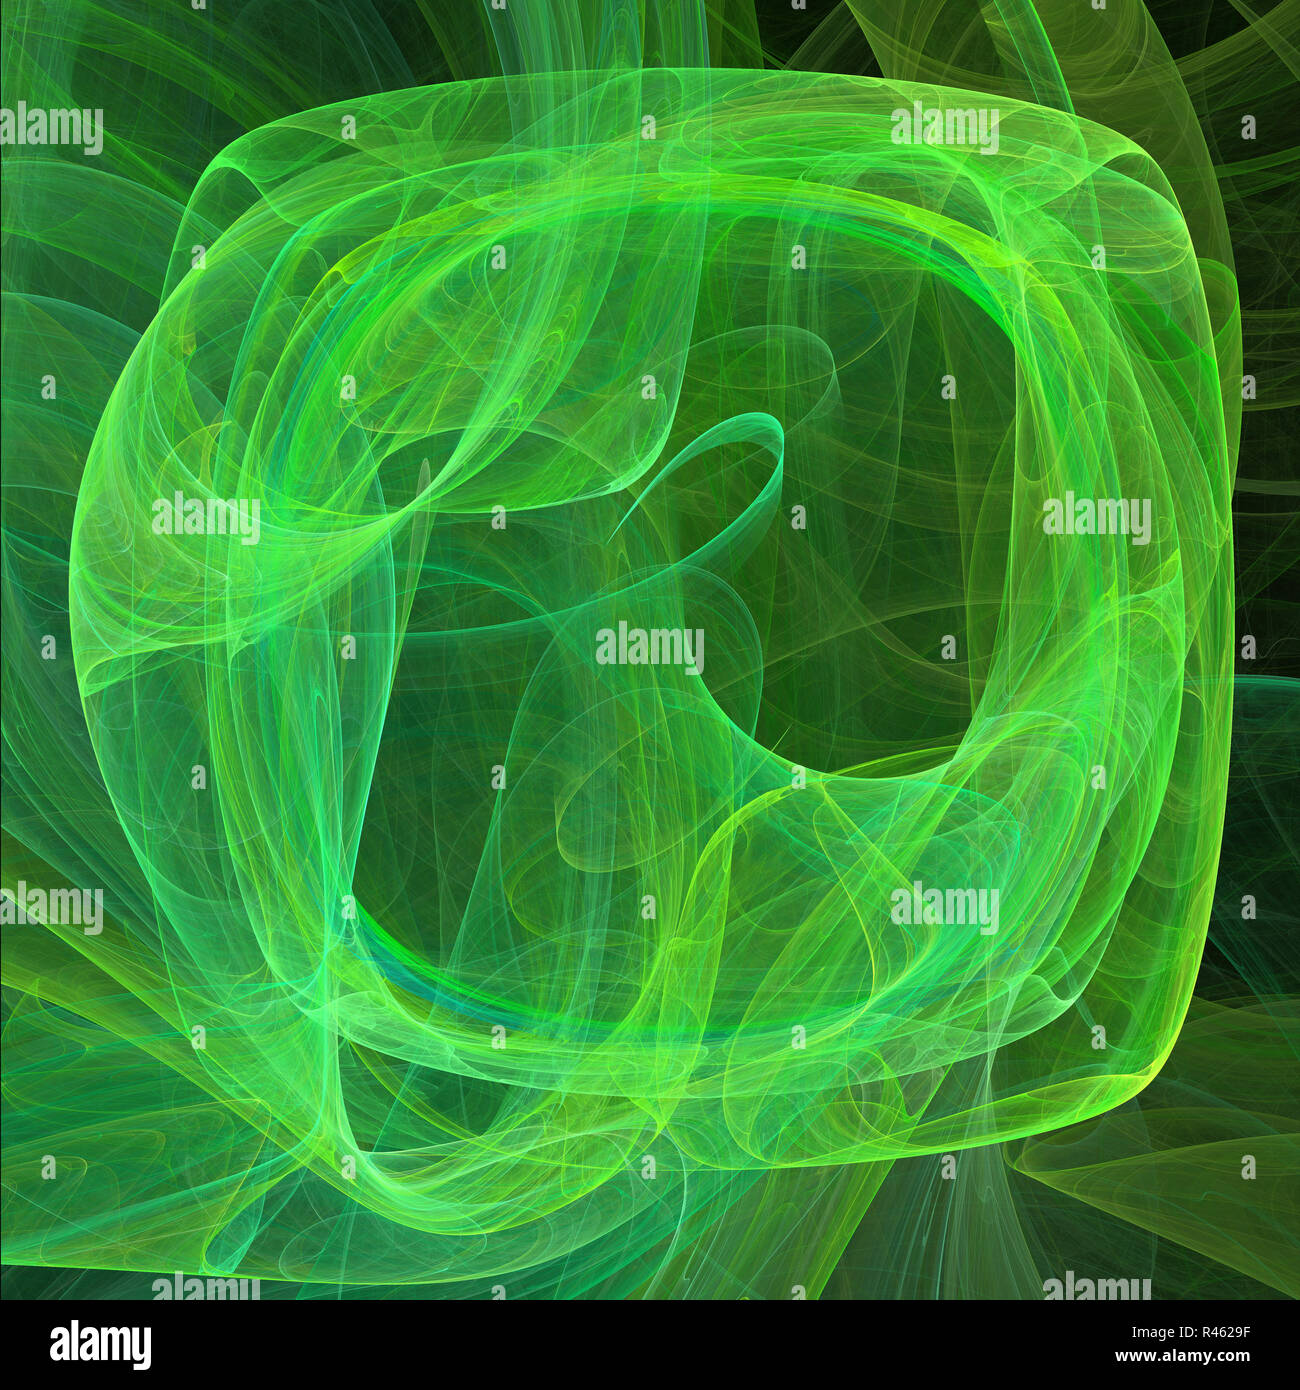 Abstract screen form with curved lines. Green on black background illustration Stock Photo